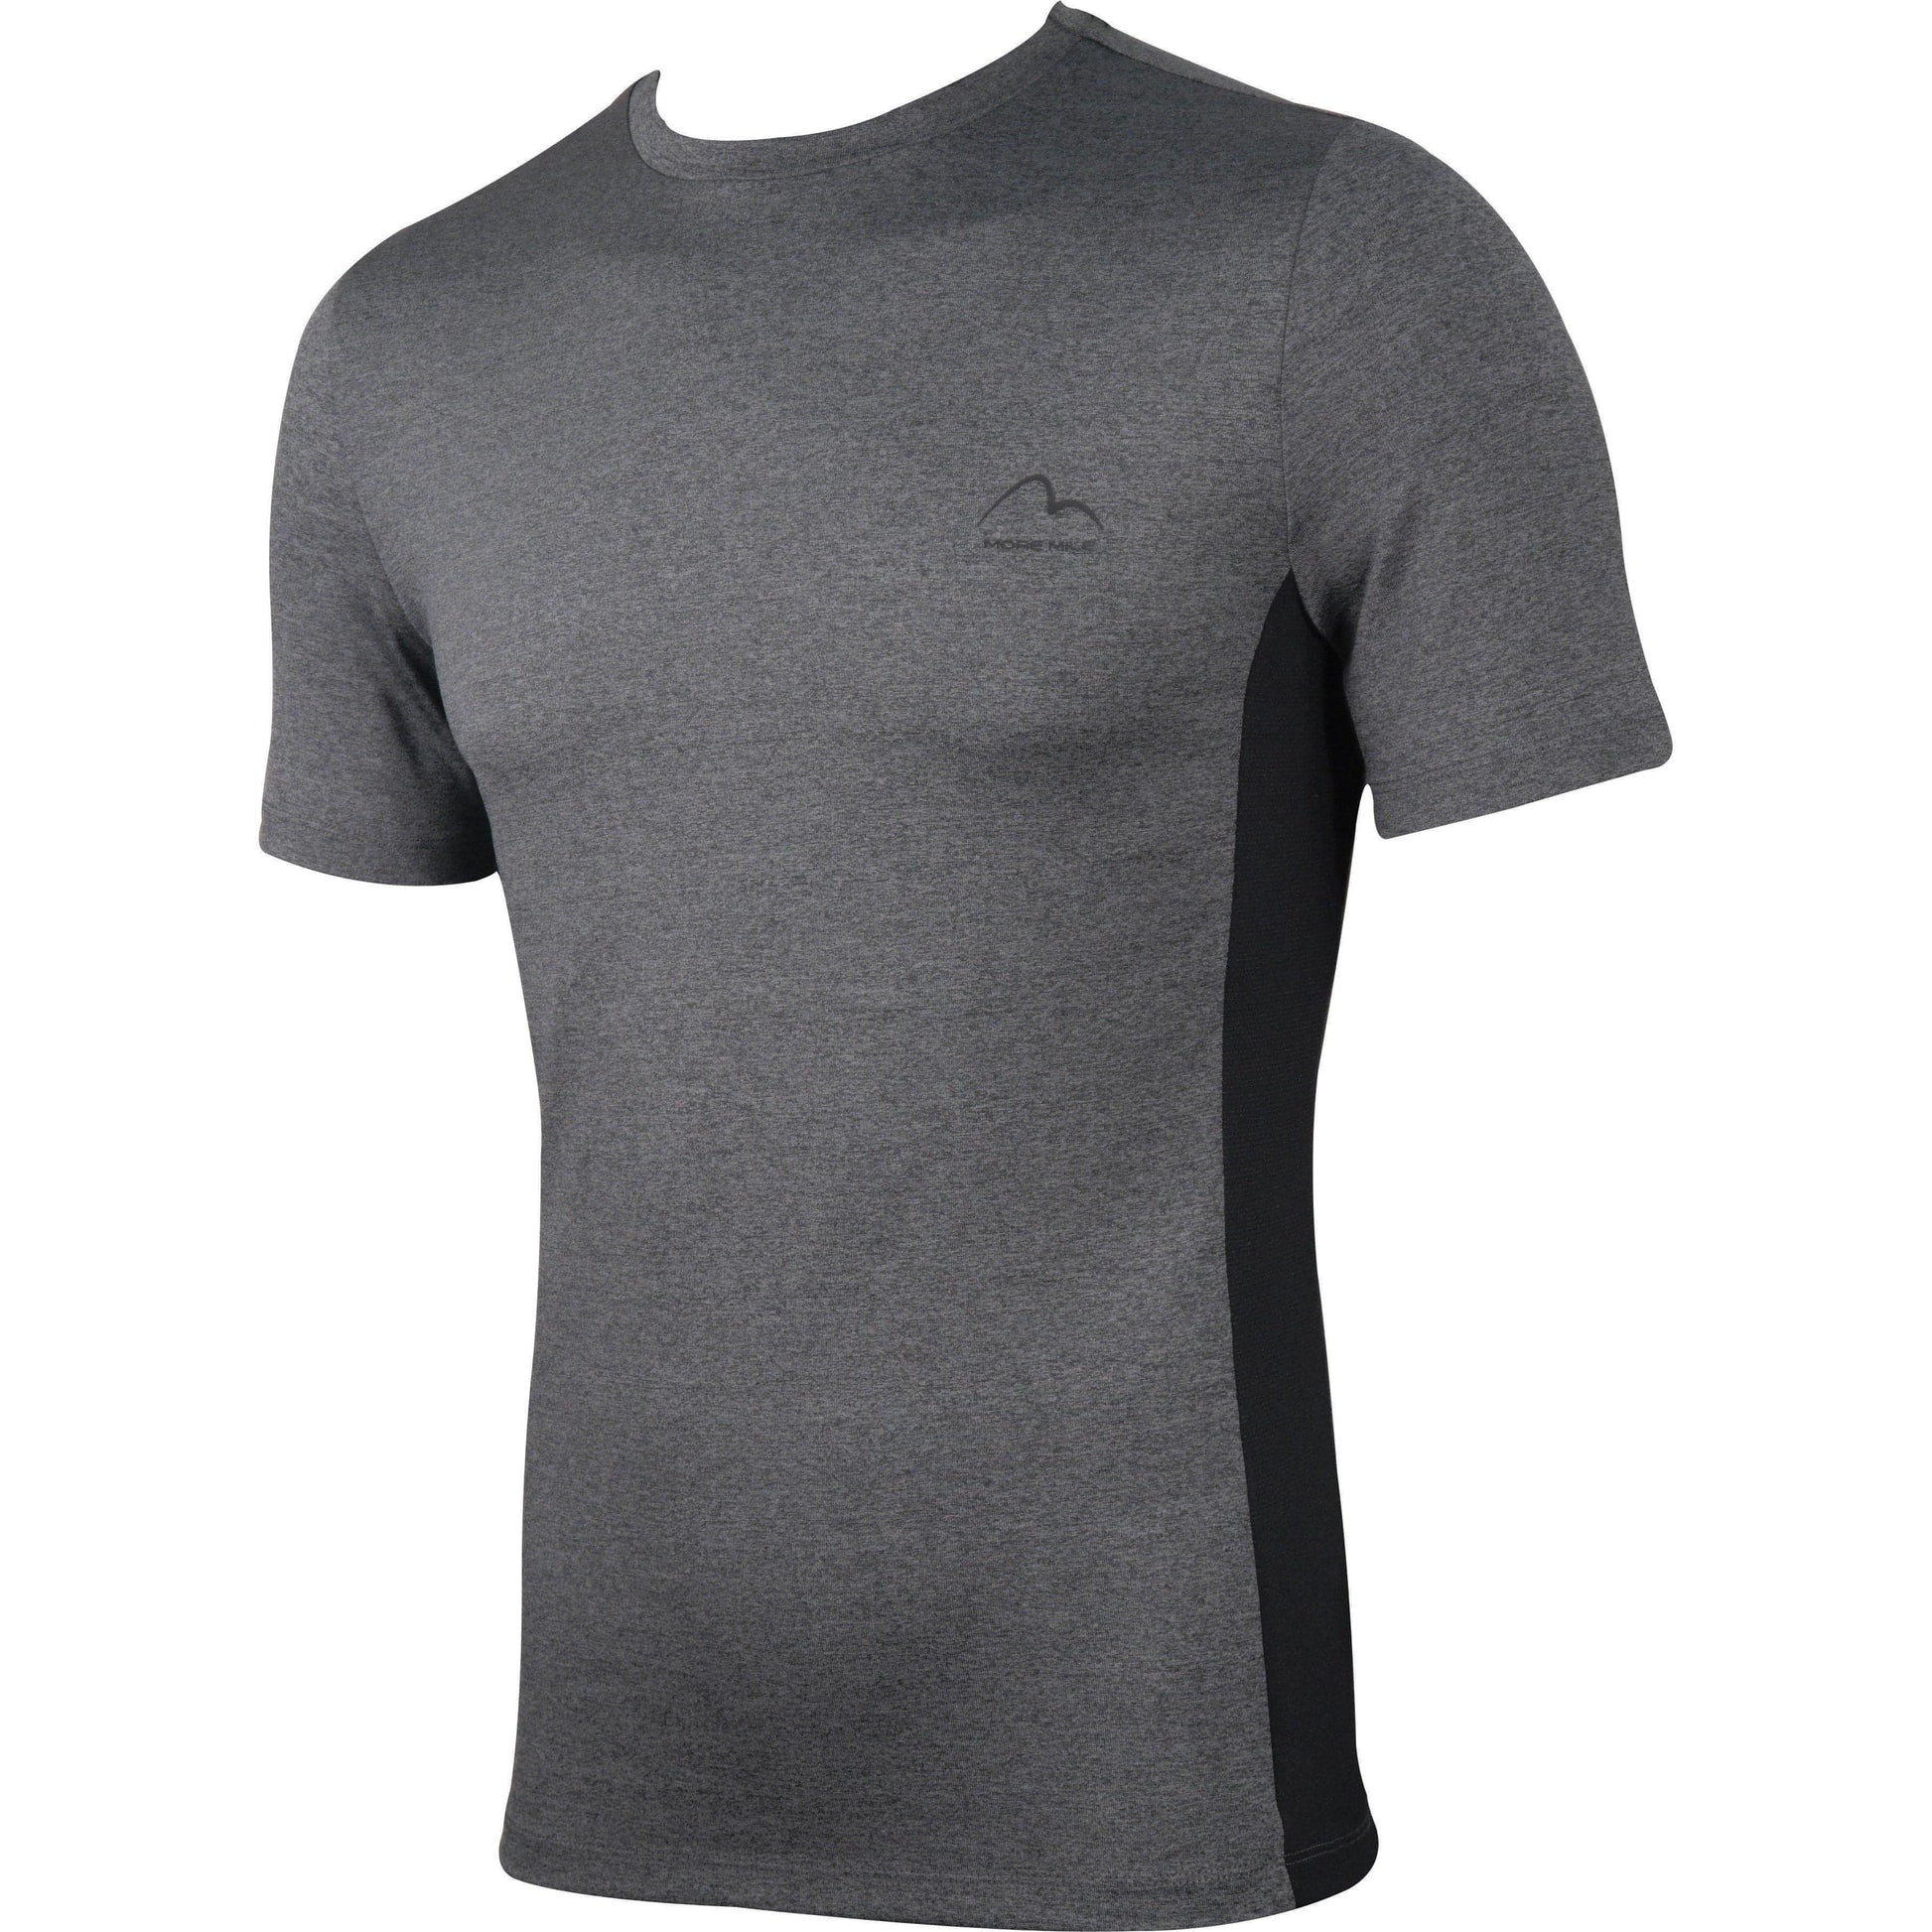 More Mile Warrior Short Sleeve Mens Fitted Training Top - Grey - Start Fitness